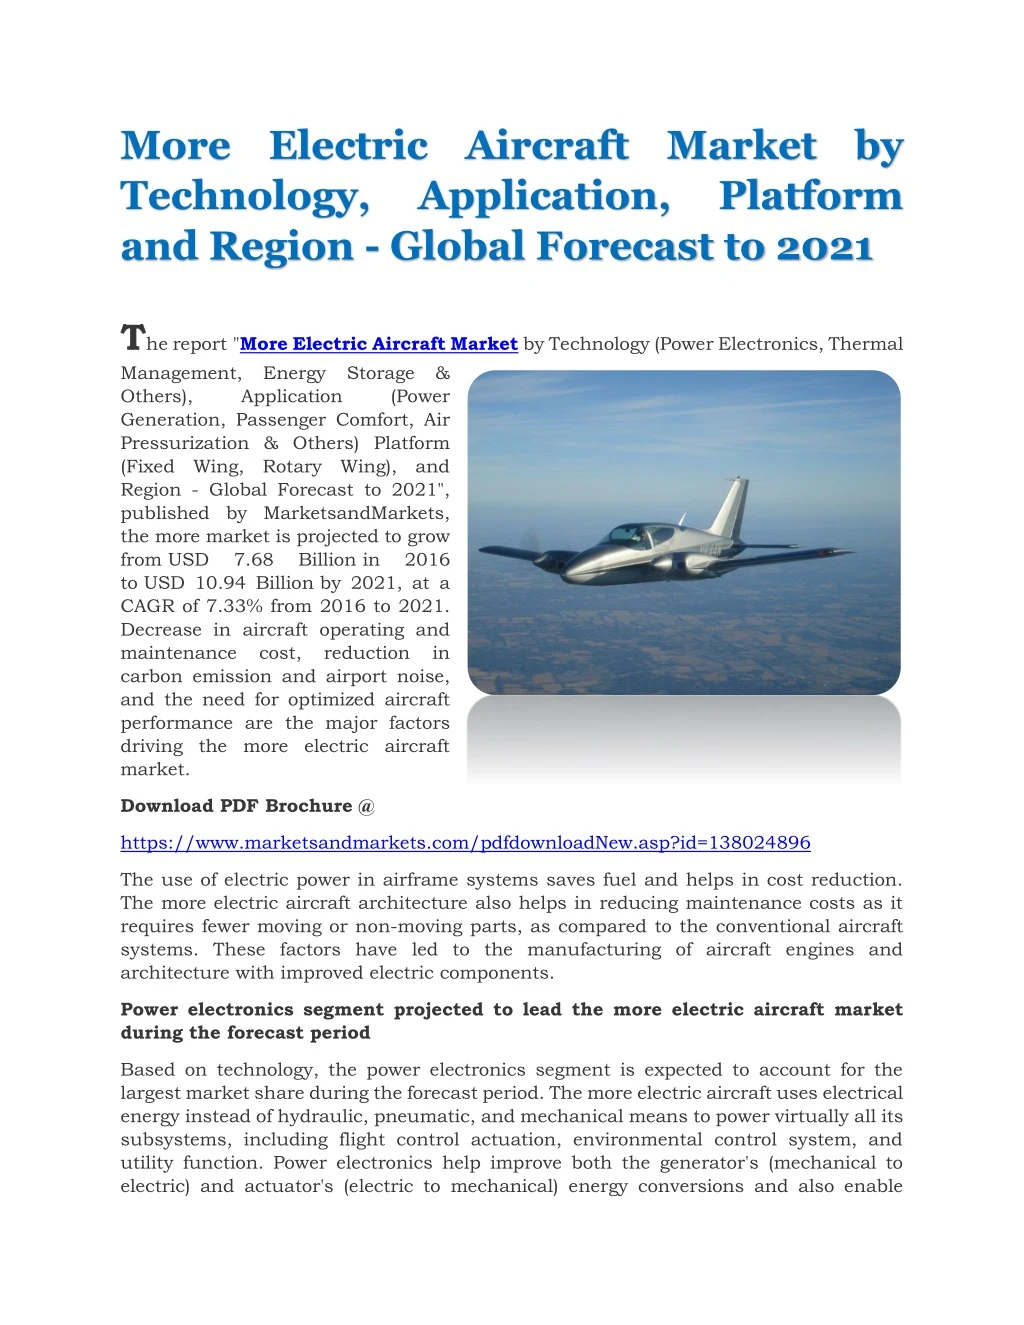 more electric aircraft market by technology